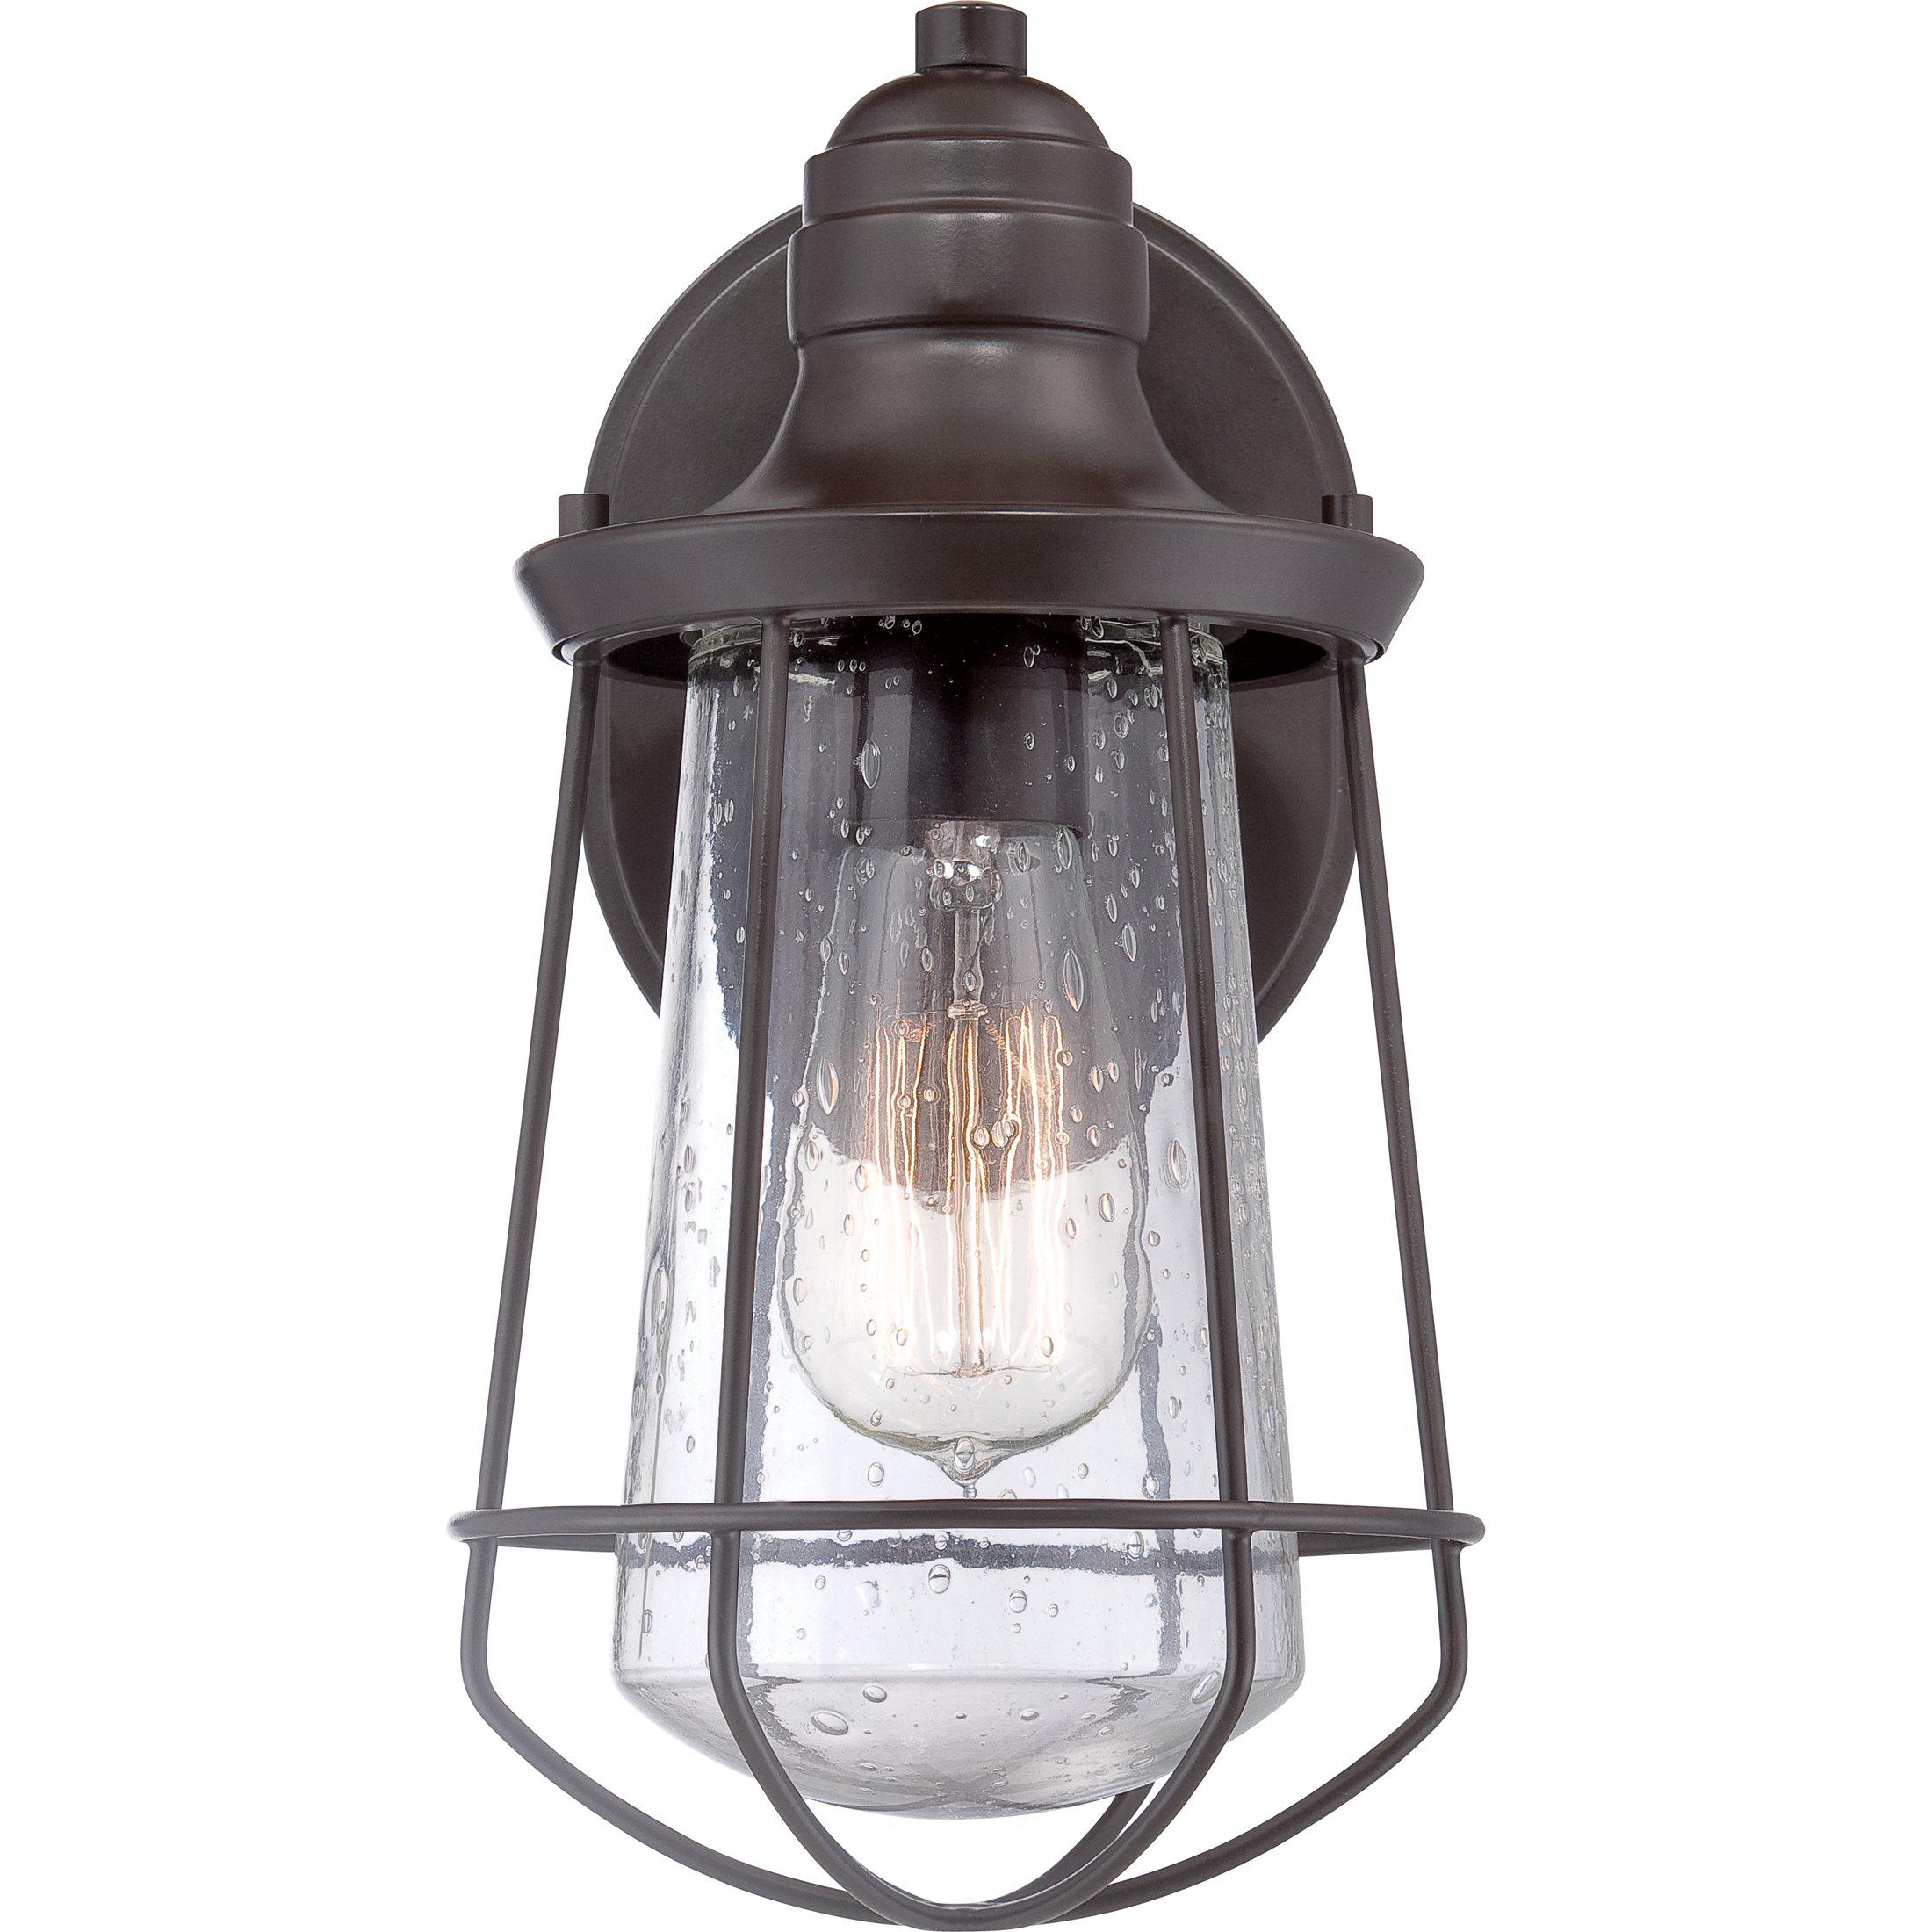 Quoizel  Marine Outdoor Lantern, Small Outdoor l Wall Quoizel   